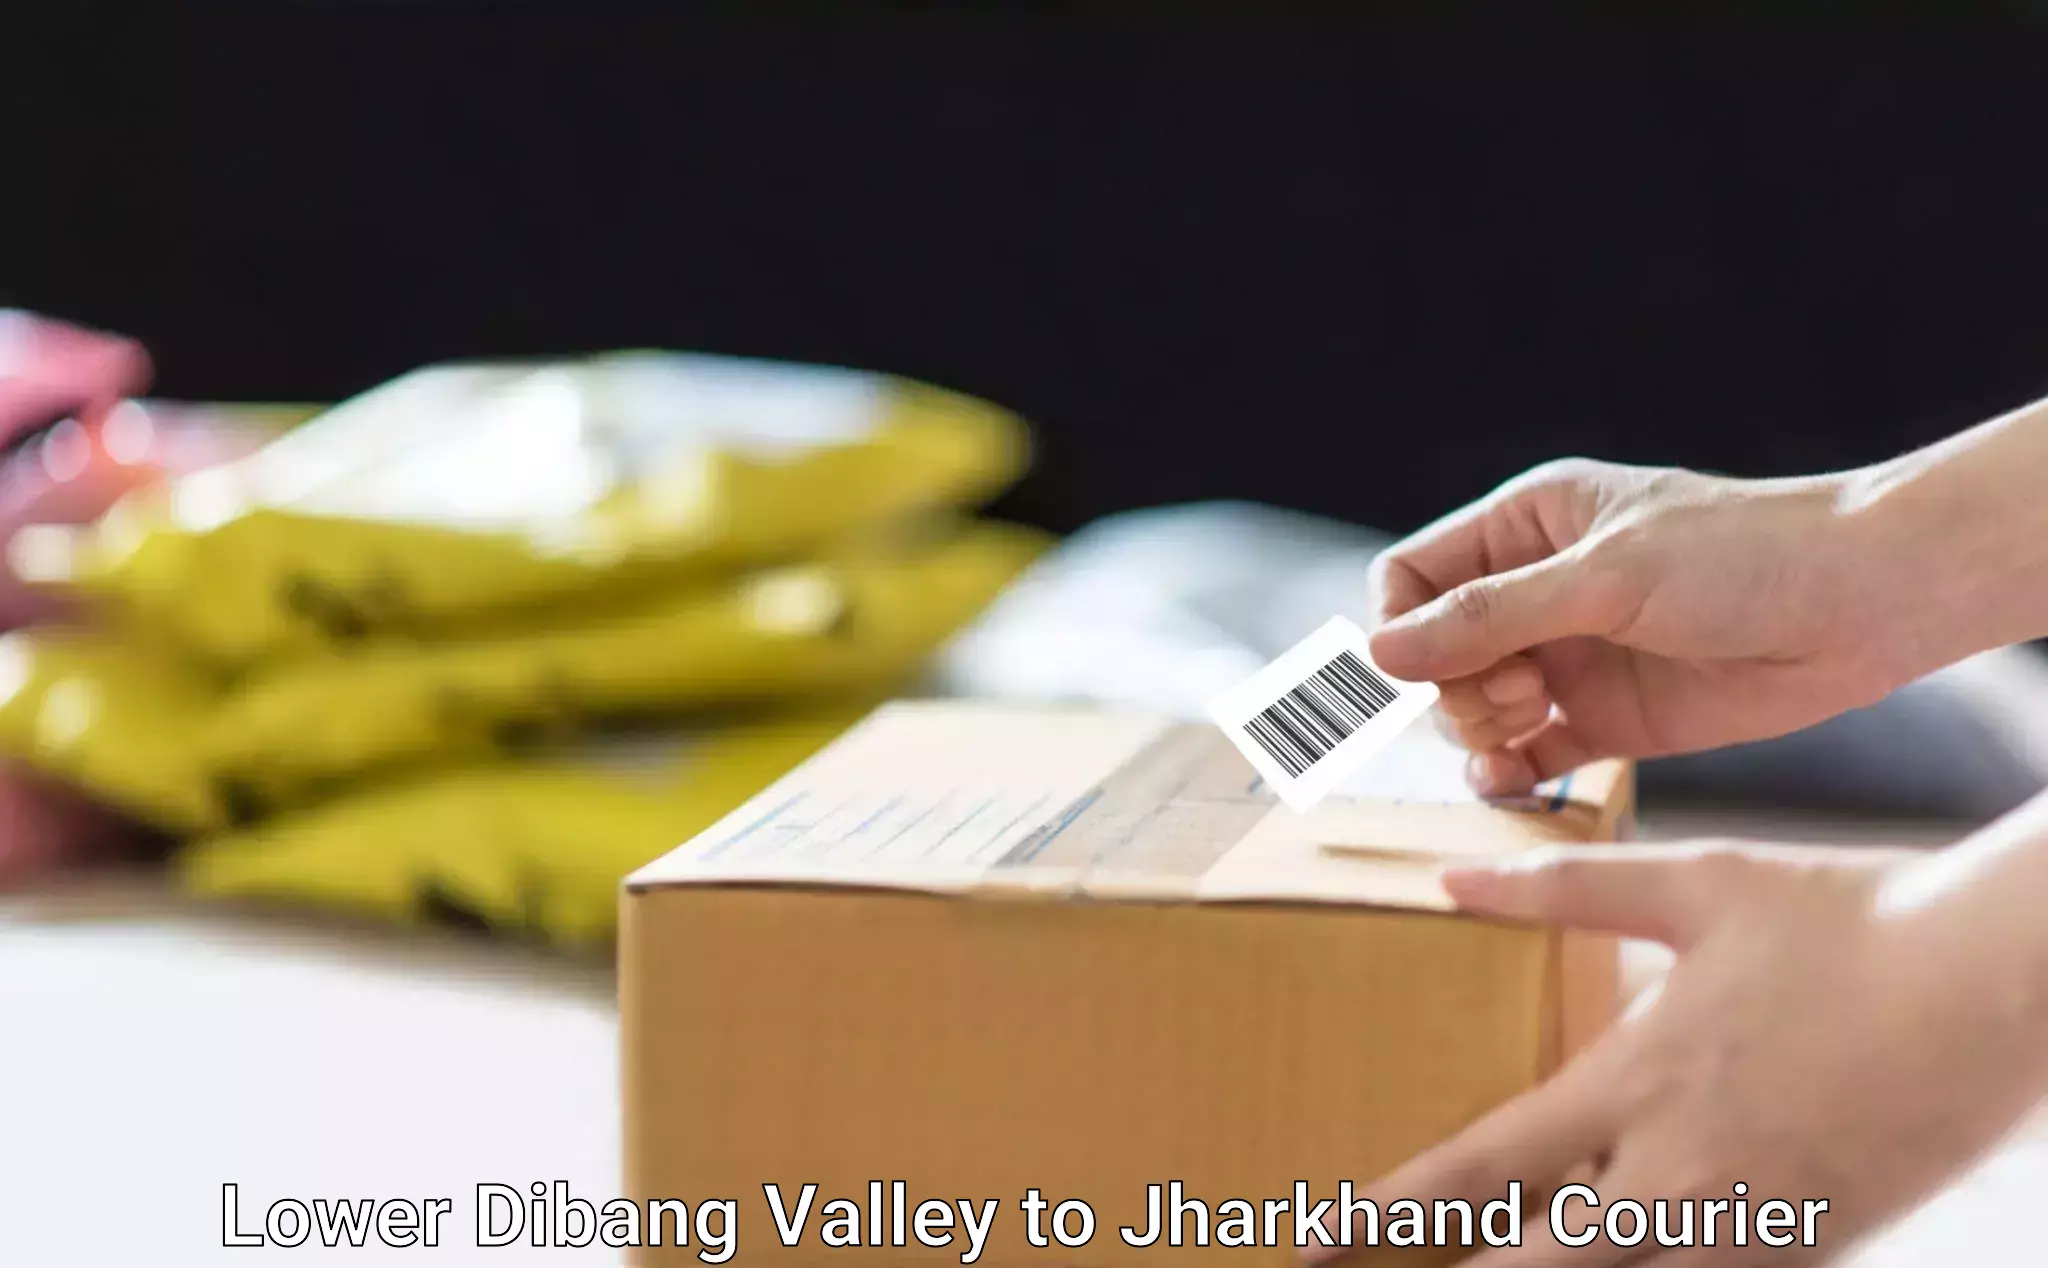 Rapid shipping services Lower Dibang Valley to Jamshedpur